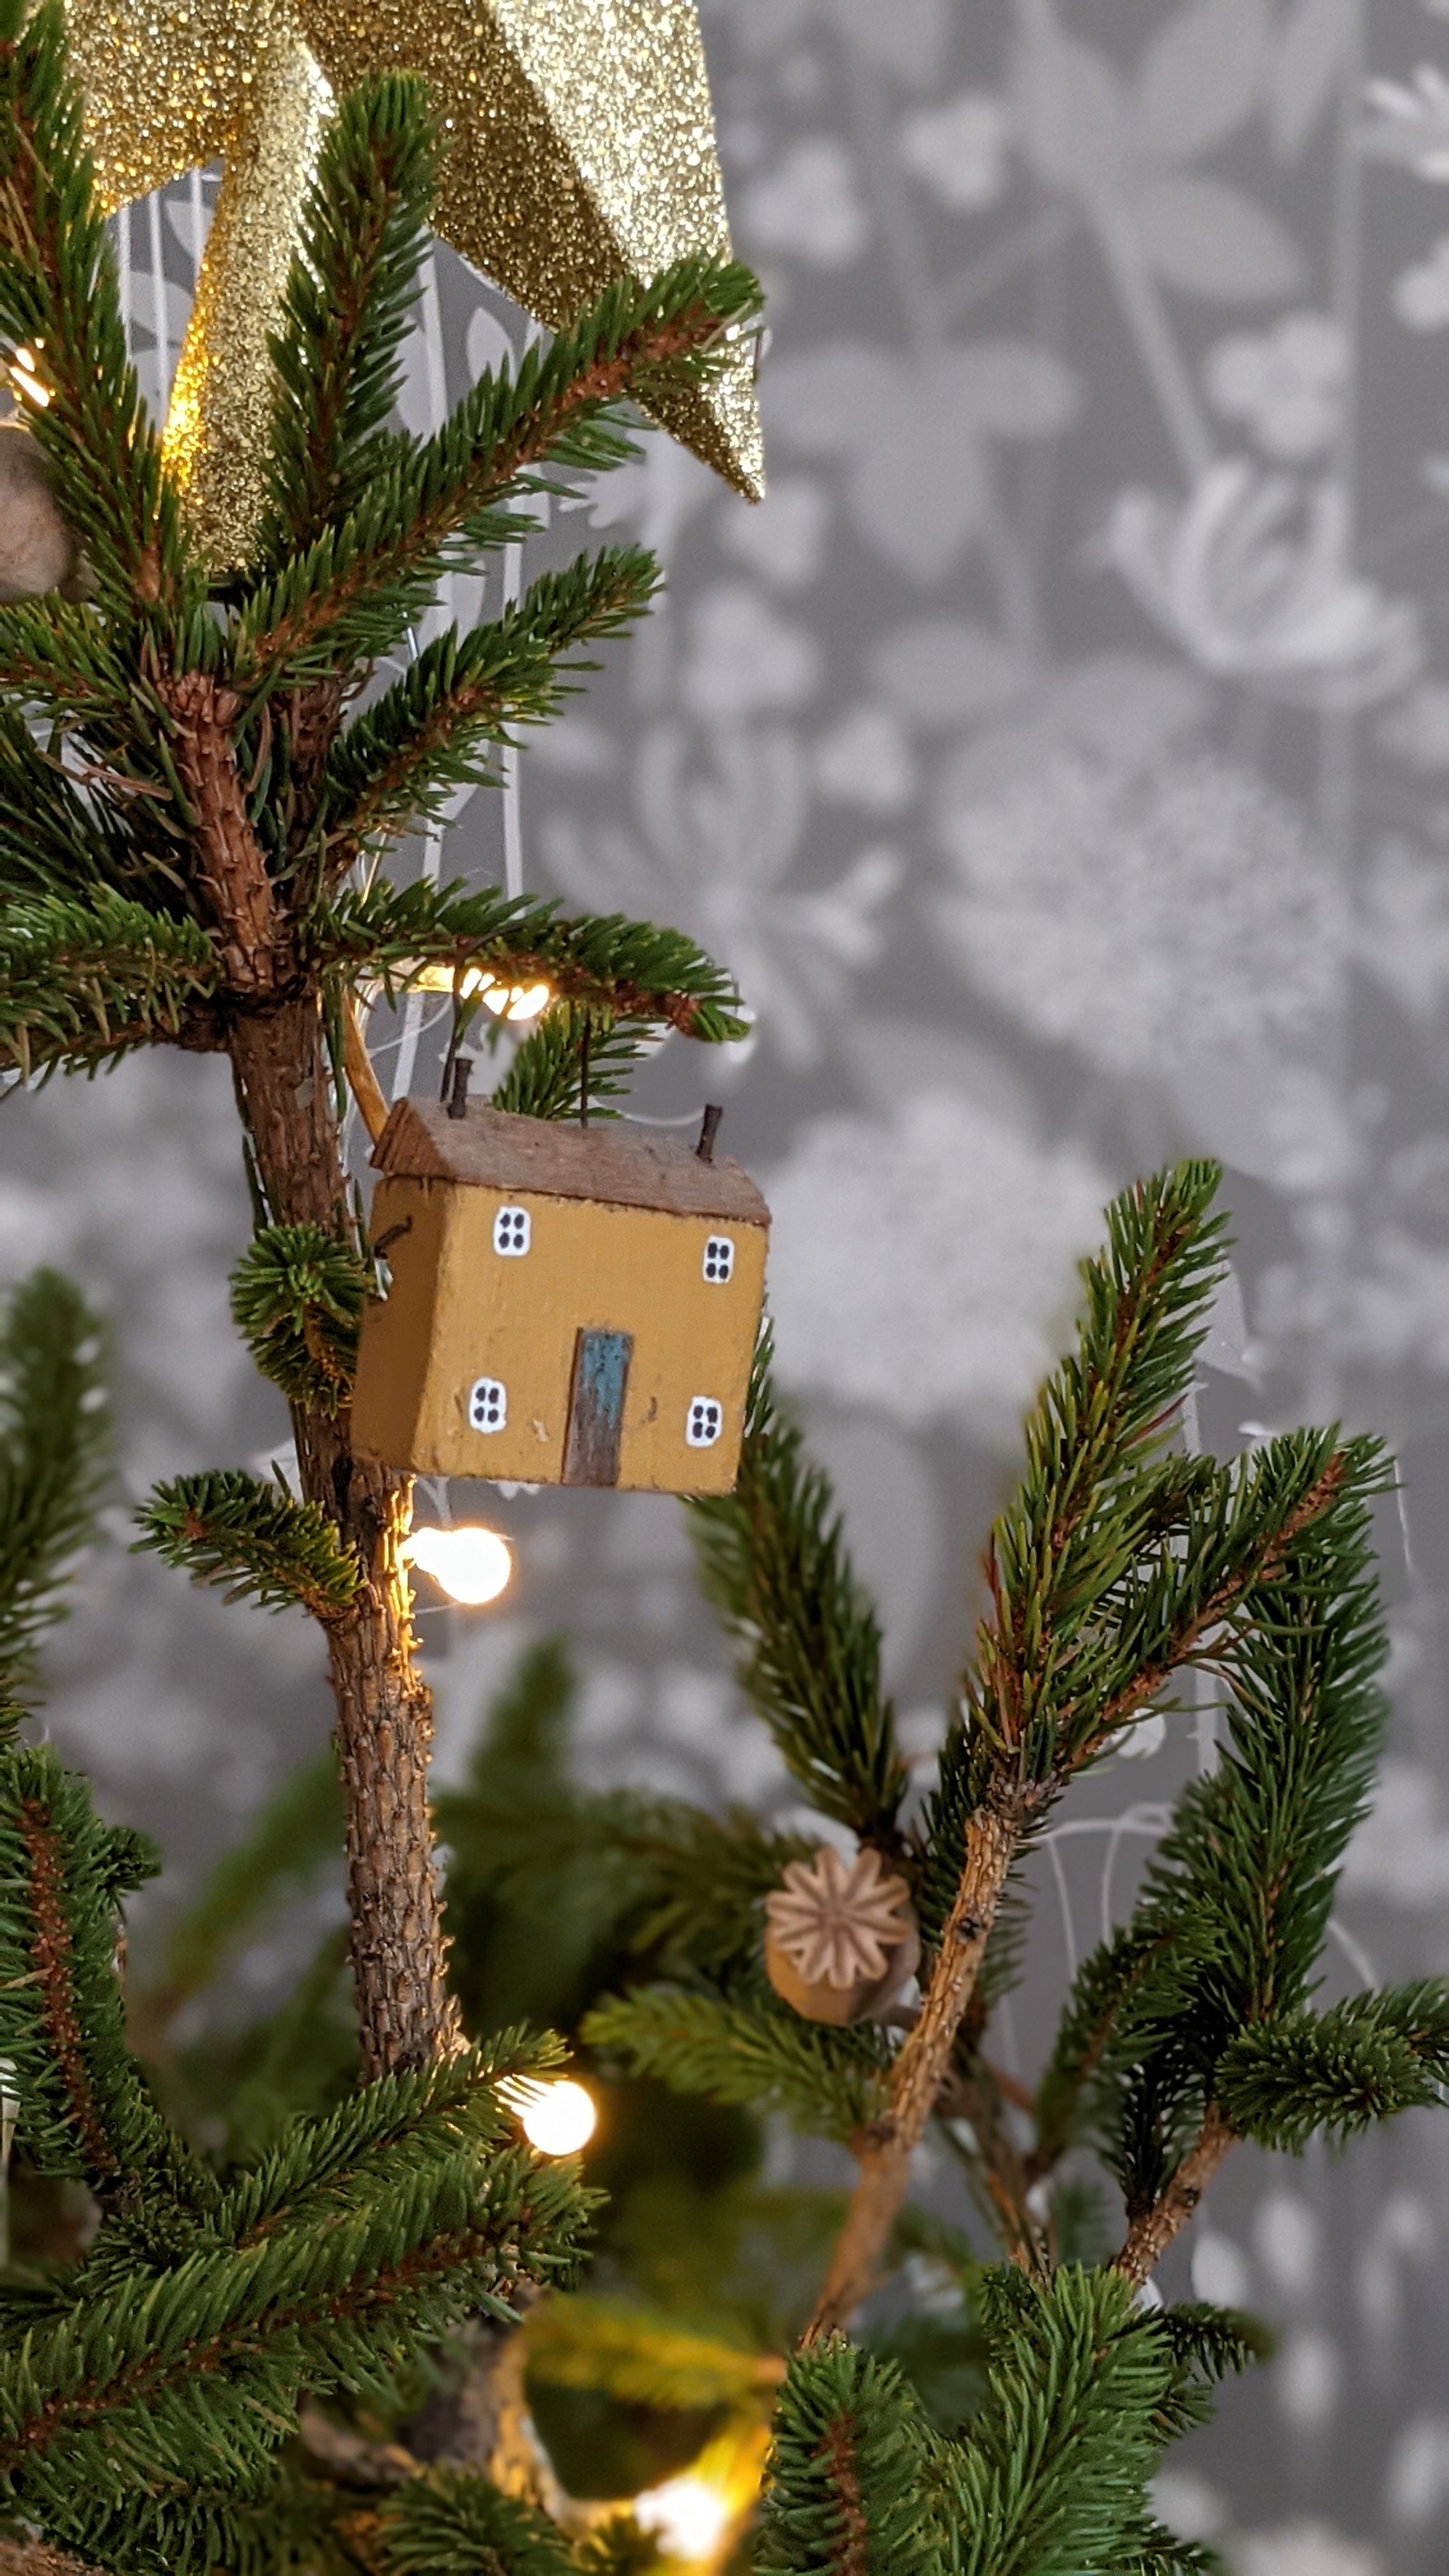 Kirtsy Elson driftwood house decoration on the christmas tree